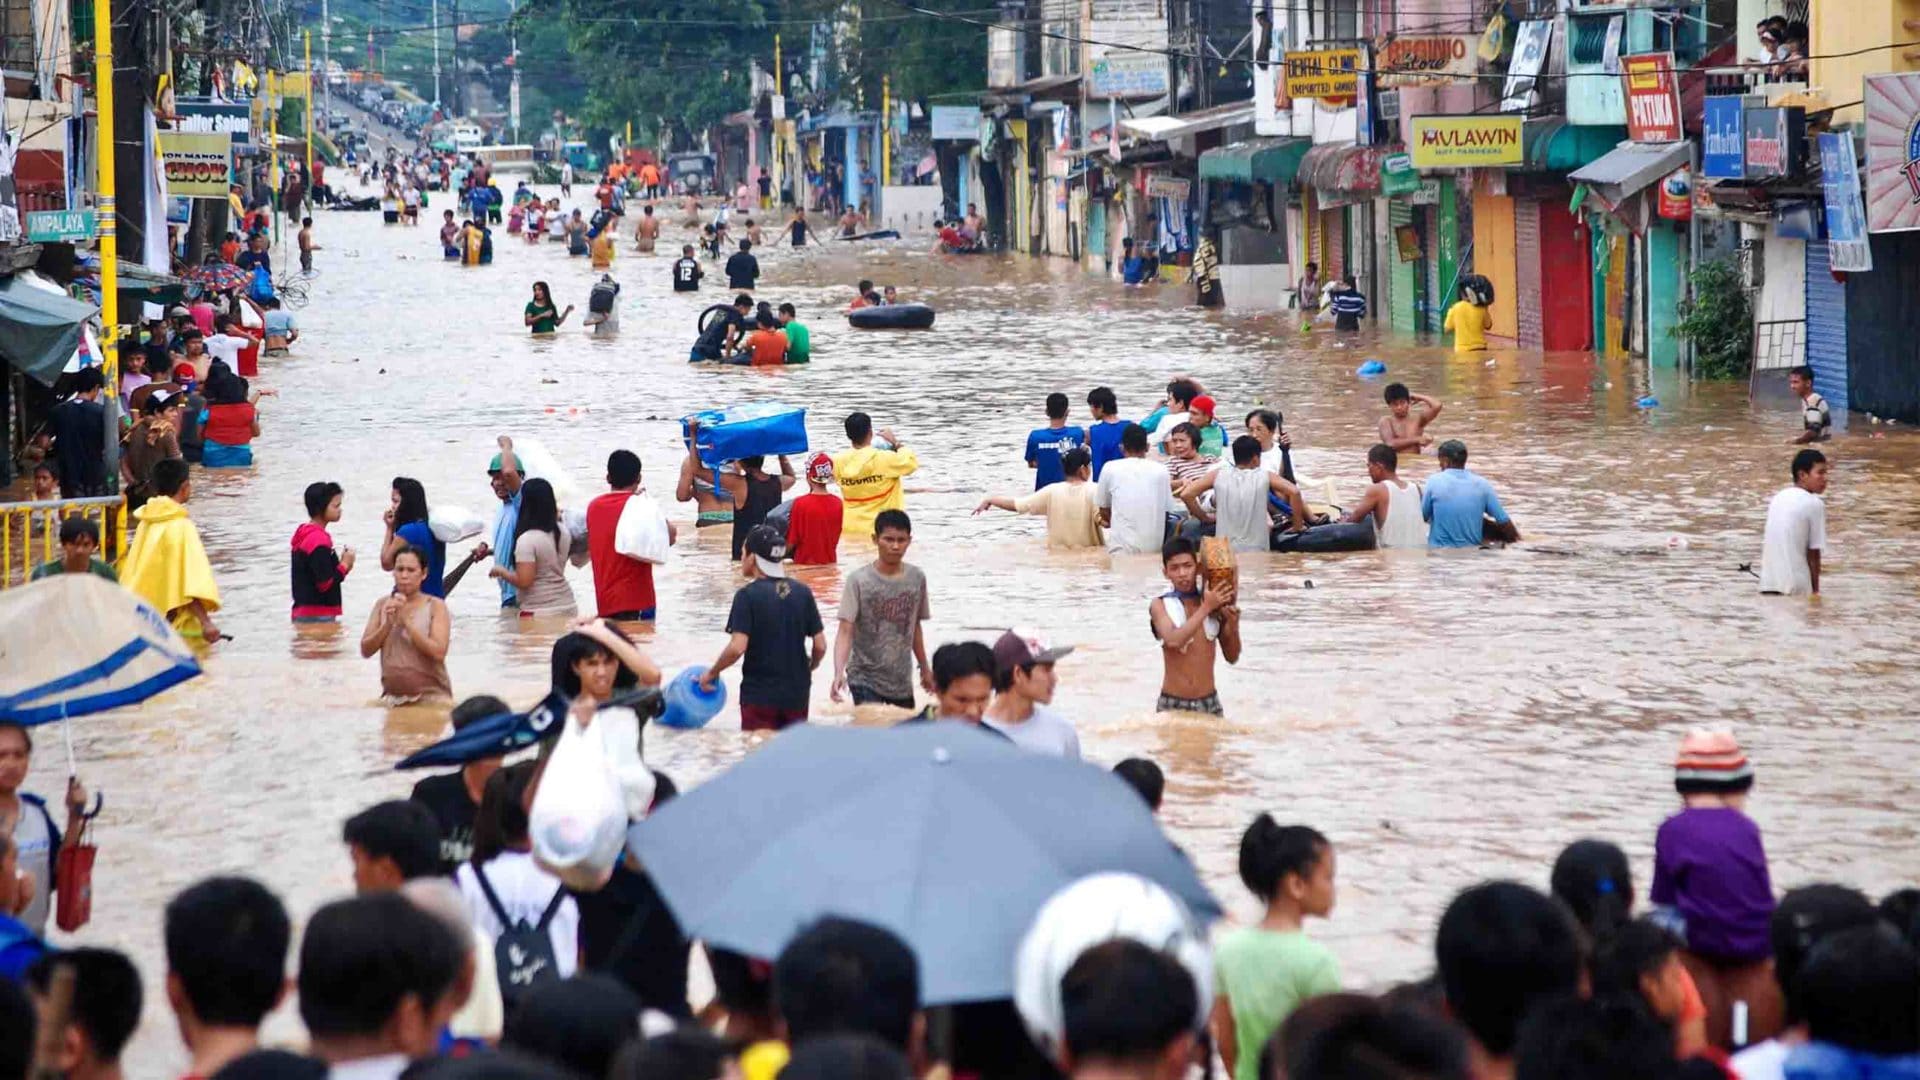 Residents of Manila cross floodwaters after torrential rains caused heavy flooding in the Philippines on August 8, 2012. The Philippines are among the low-lying nations most at risk of flooding from rising sea levels.